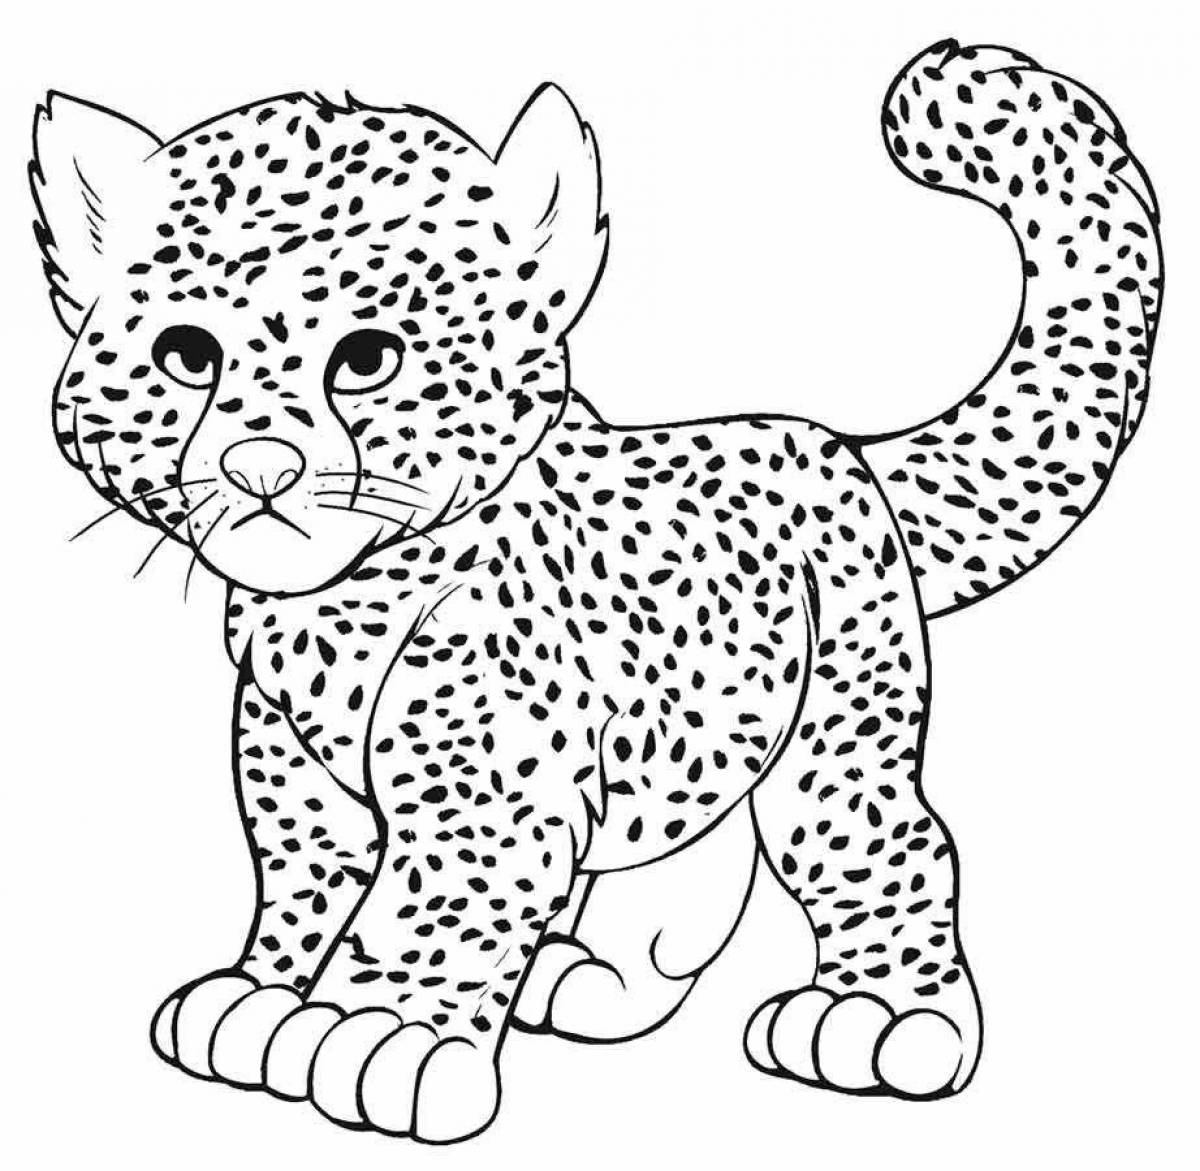 Fancy leopard coloring book for kids